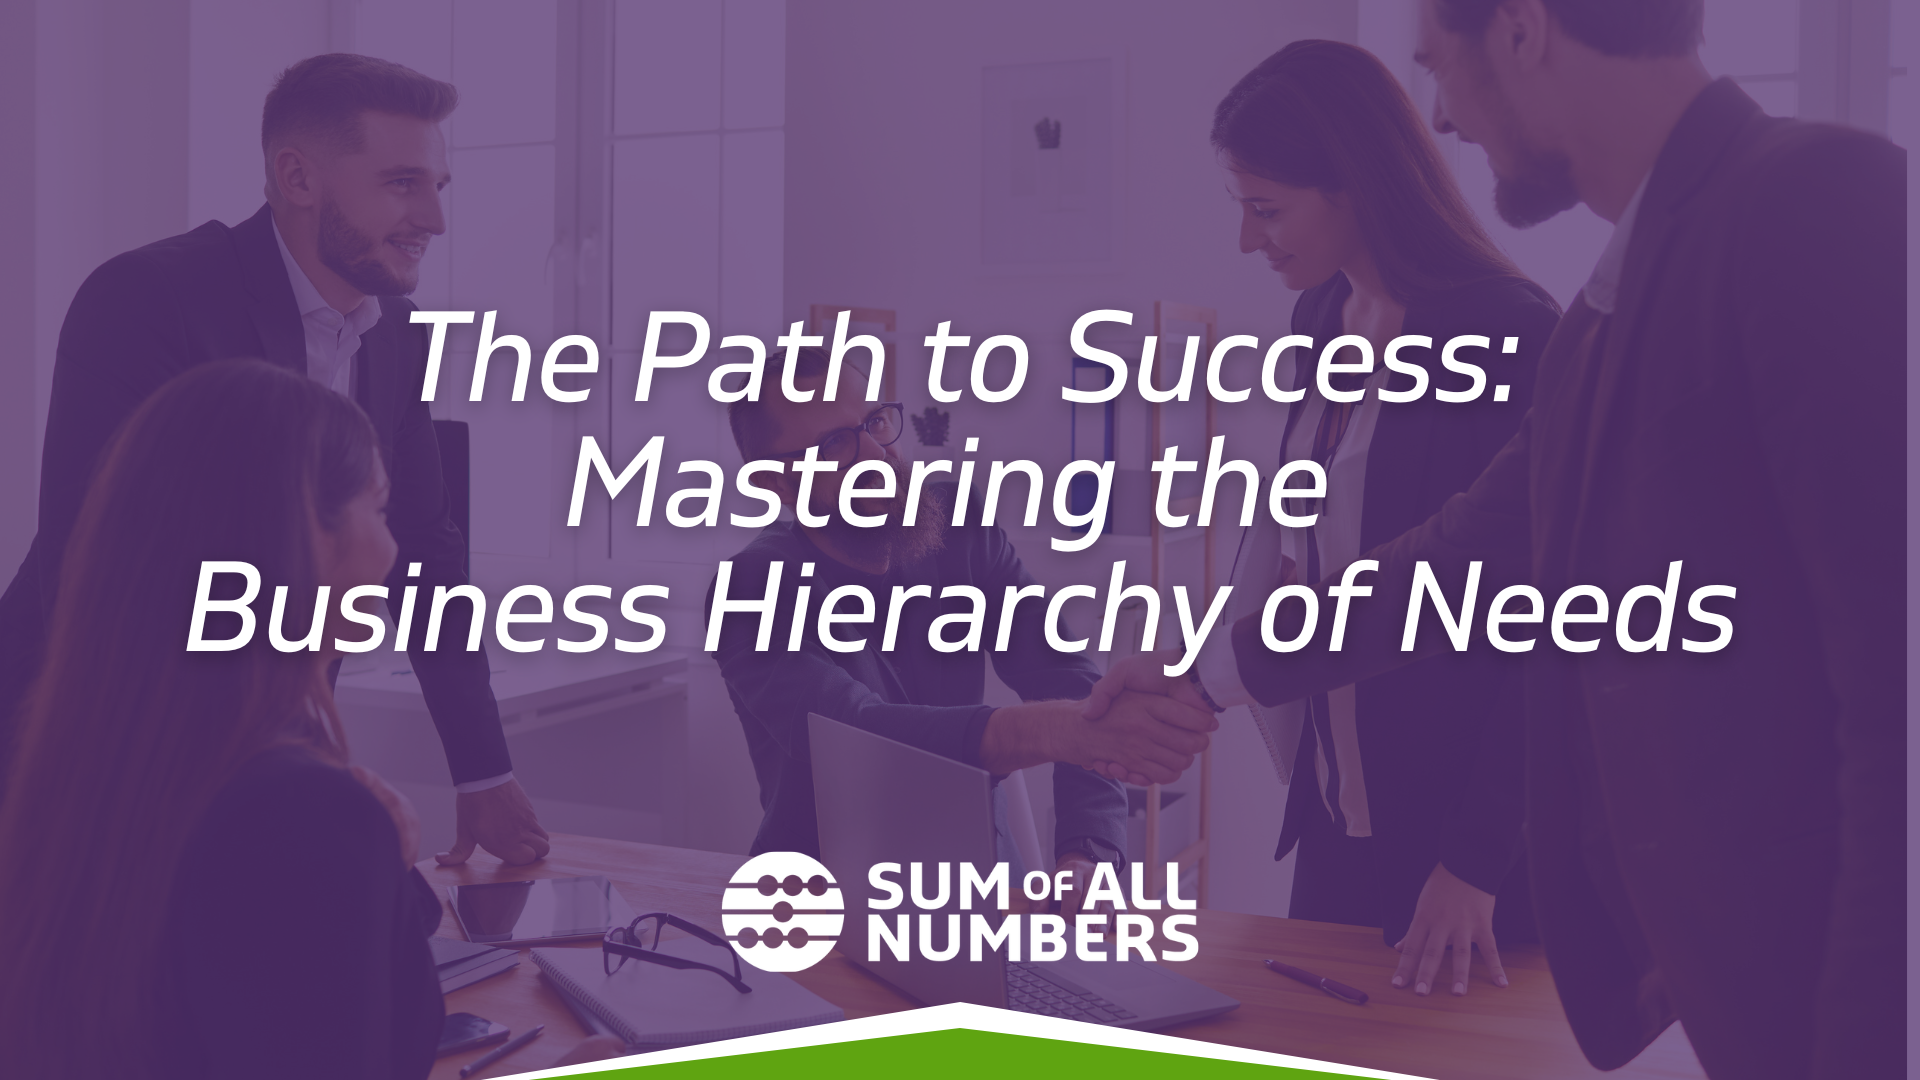 The Path to Success: Mastering the Business Hierarchy of Needs